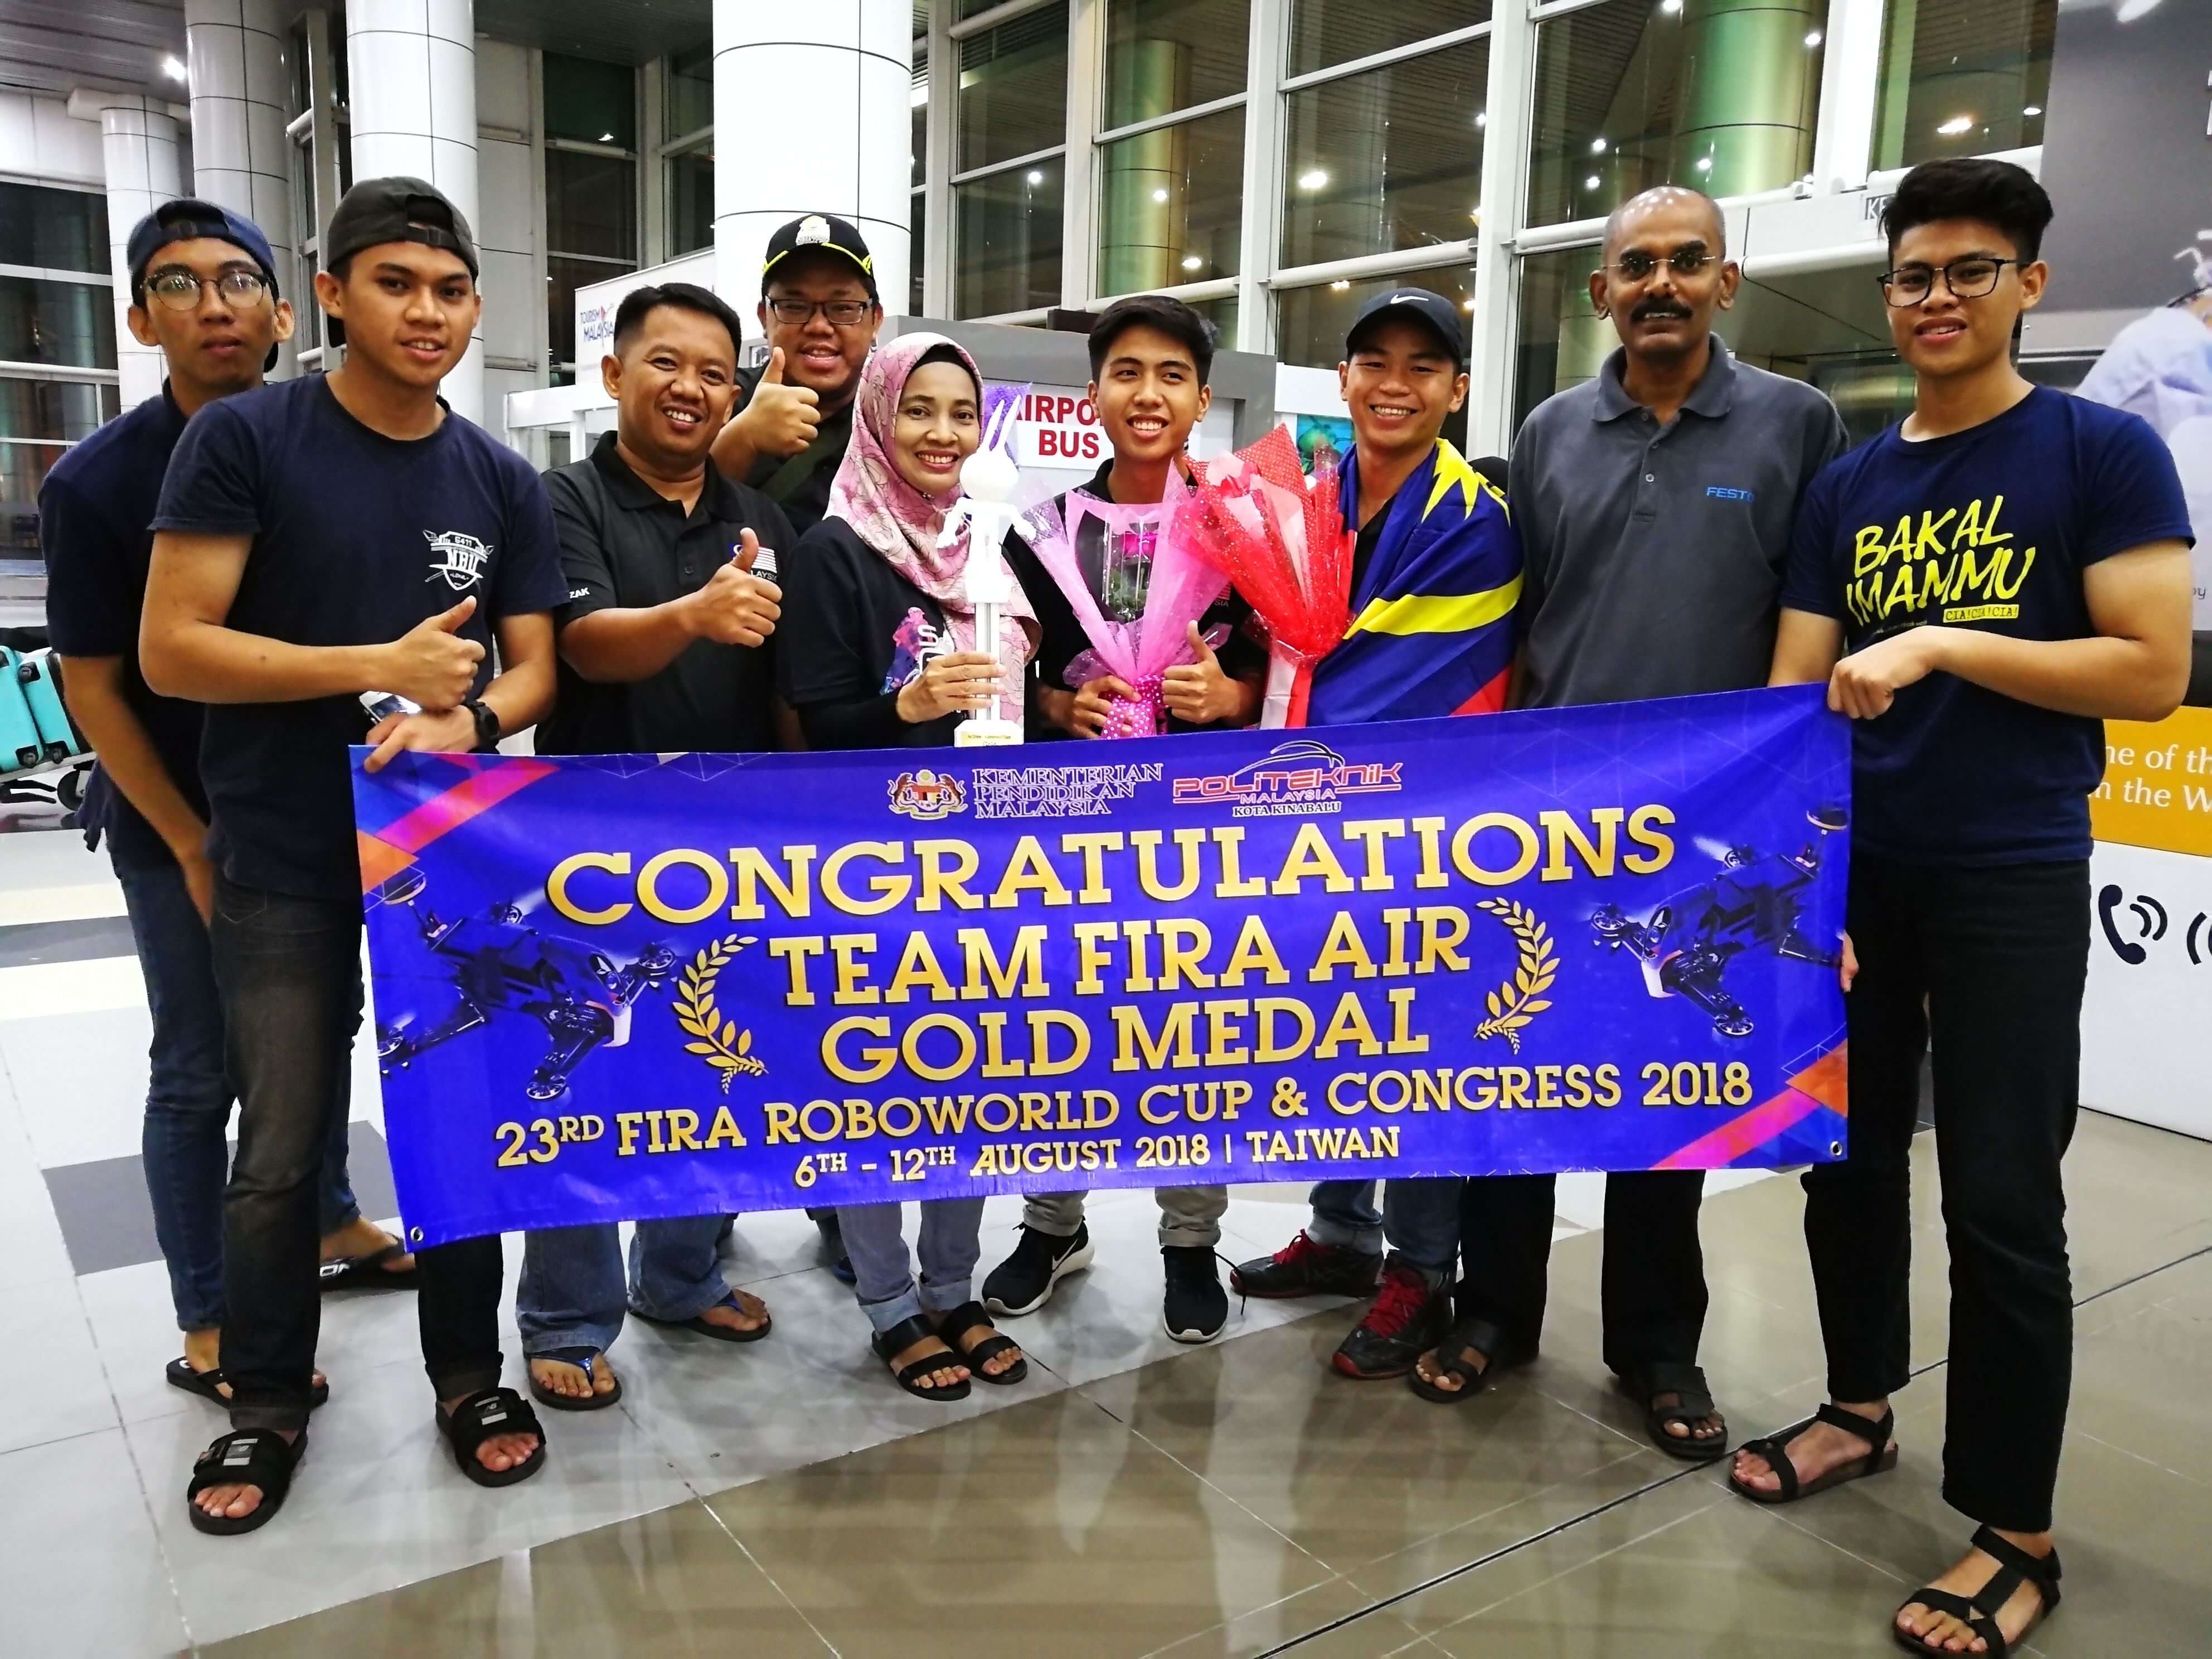 Zainab with the FIRA Air Team at the Kota Kinbalu International Airport upon their arrival from Taiwan. Rekimi (third from right), Mohd. Hariz (fourth from right) and Wong Wei Ming (fourth from left), together with PKK’s Mechanical Engineering students and lecturers.